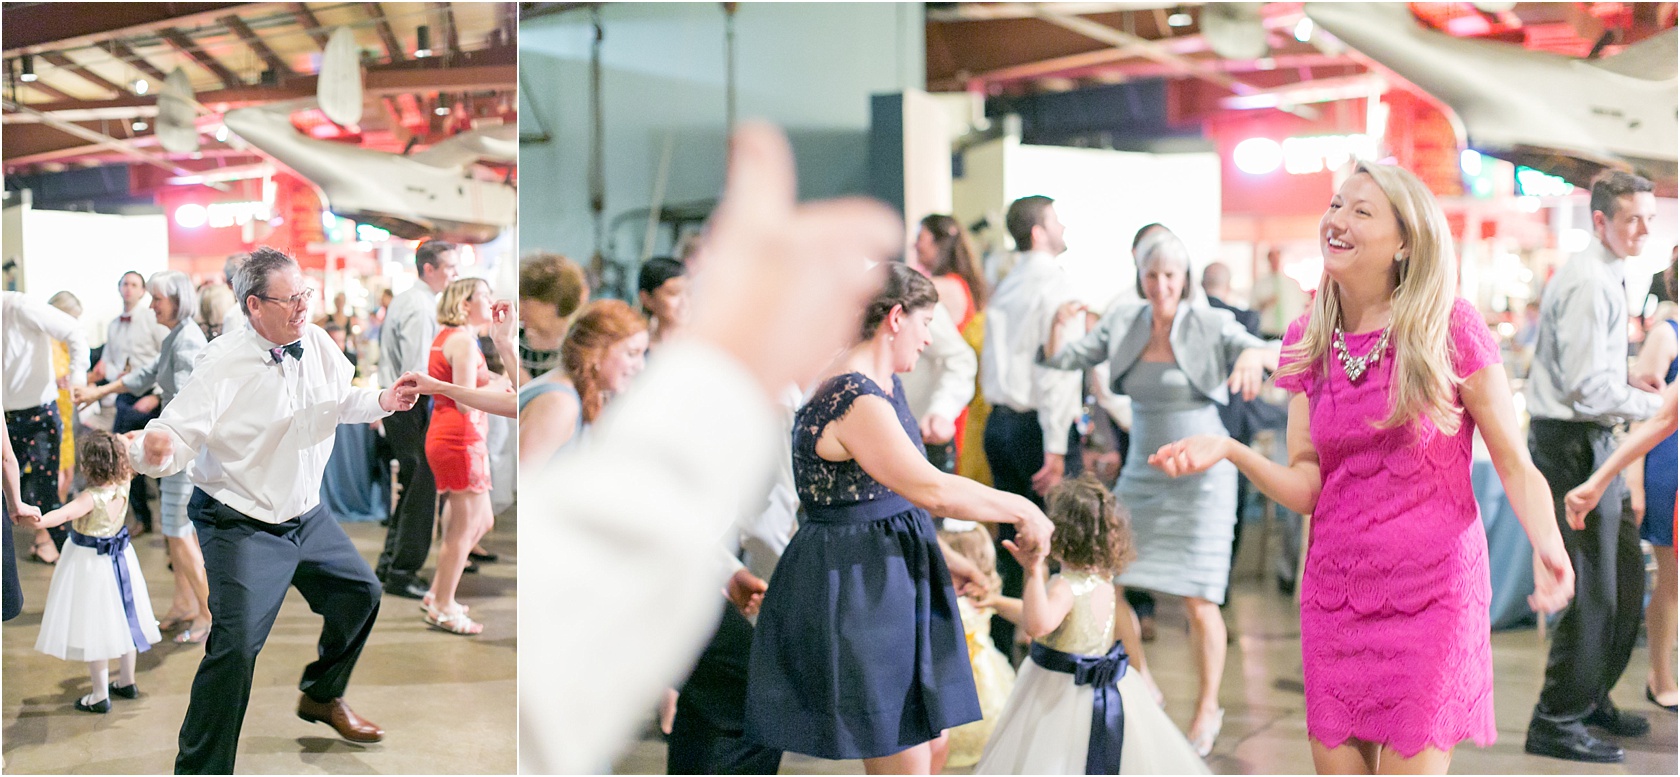 Rowland Baltimore Museum of Industry Wedding Living Radiant Photography photos_0163.jpg